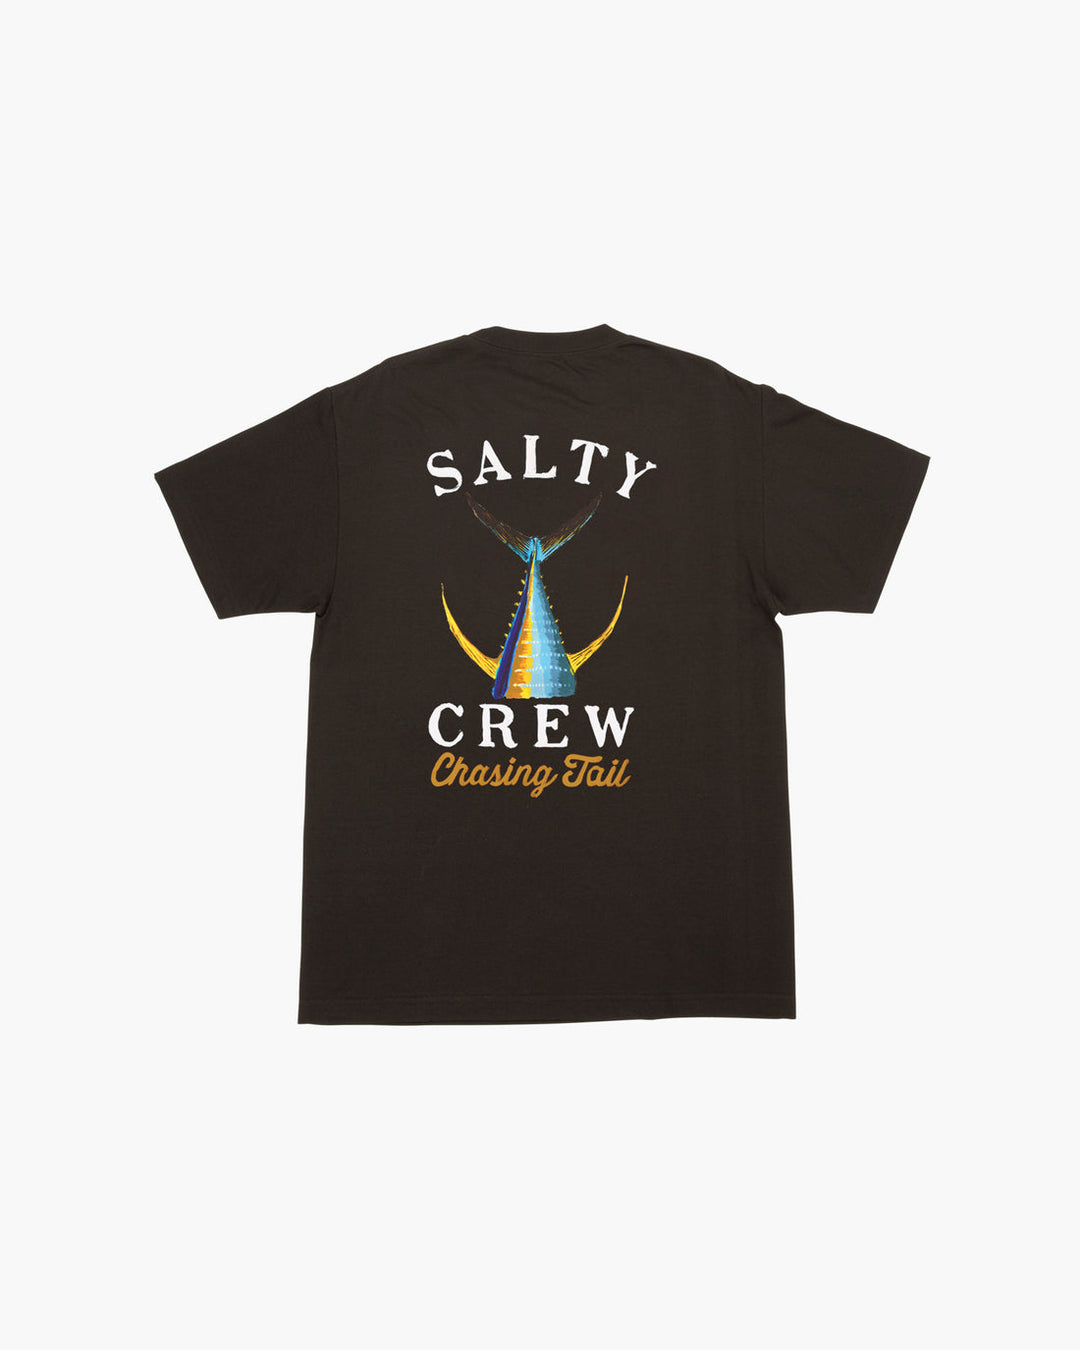 Salty Crew Tailed S/S Standard Tee - Black (Back Detail)